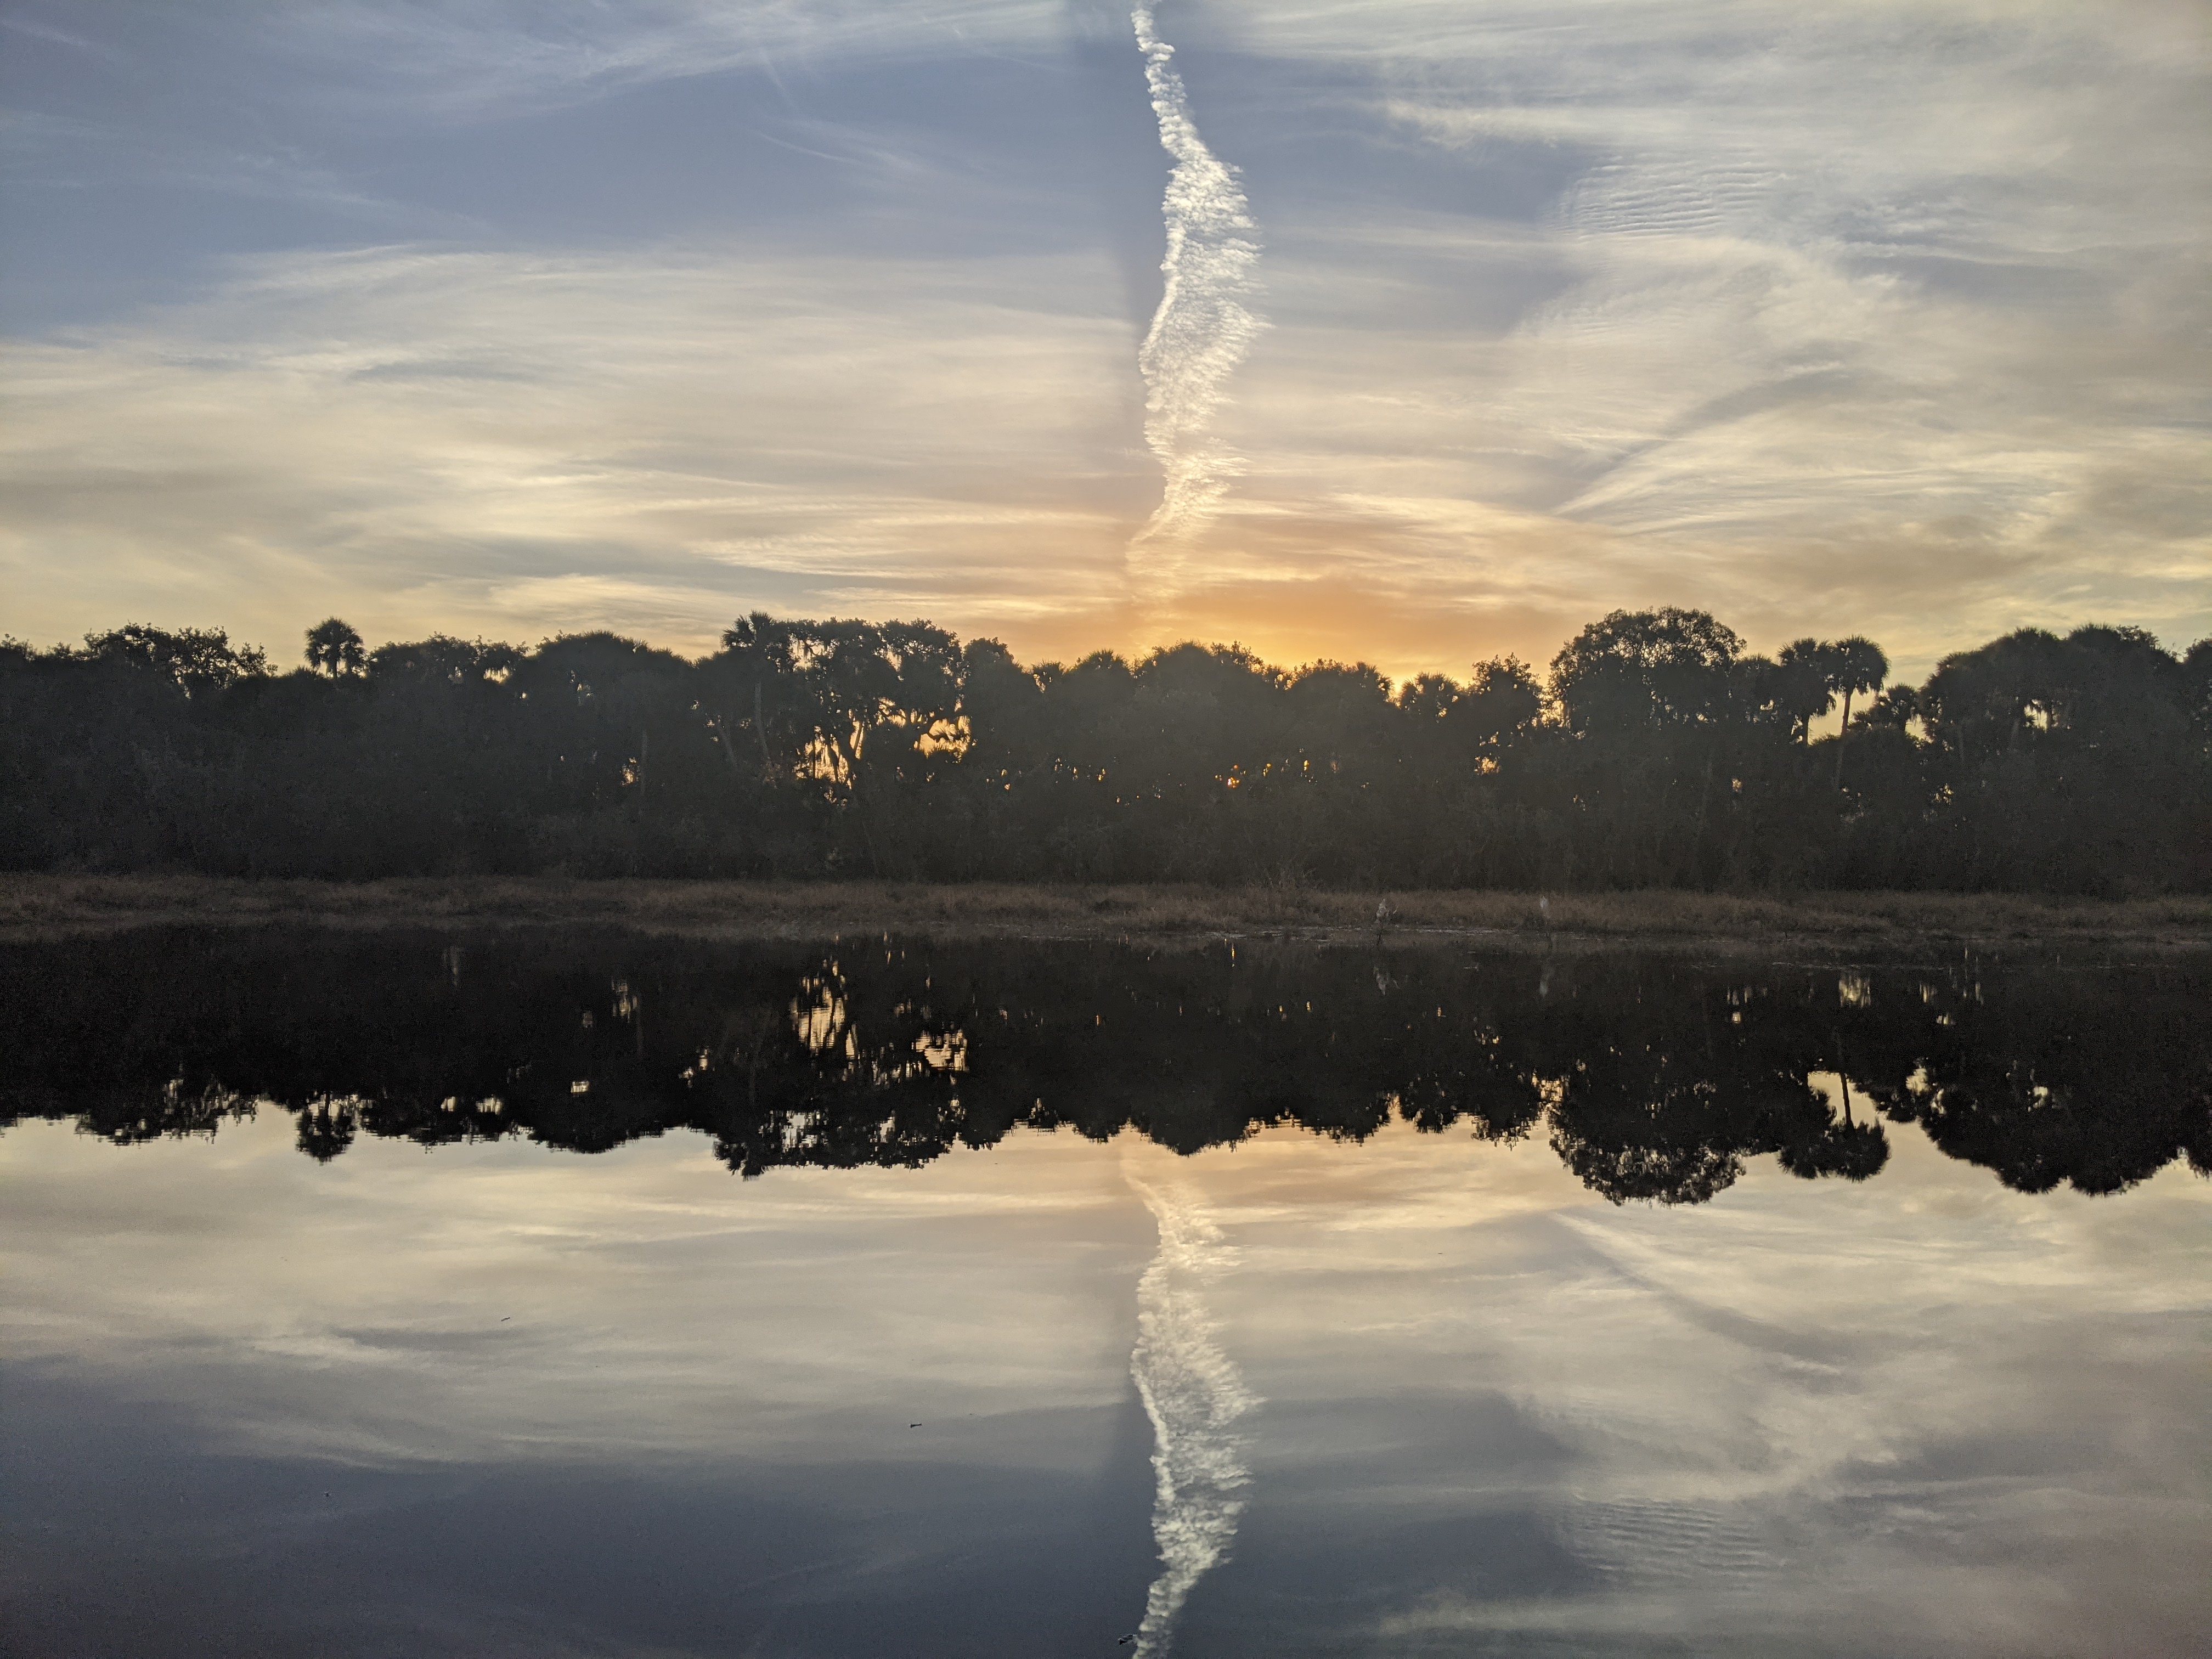 sunrise reflected in the marsh, reflexive appearance from clouds